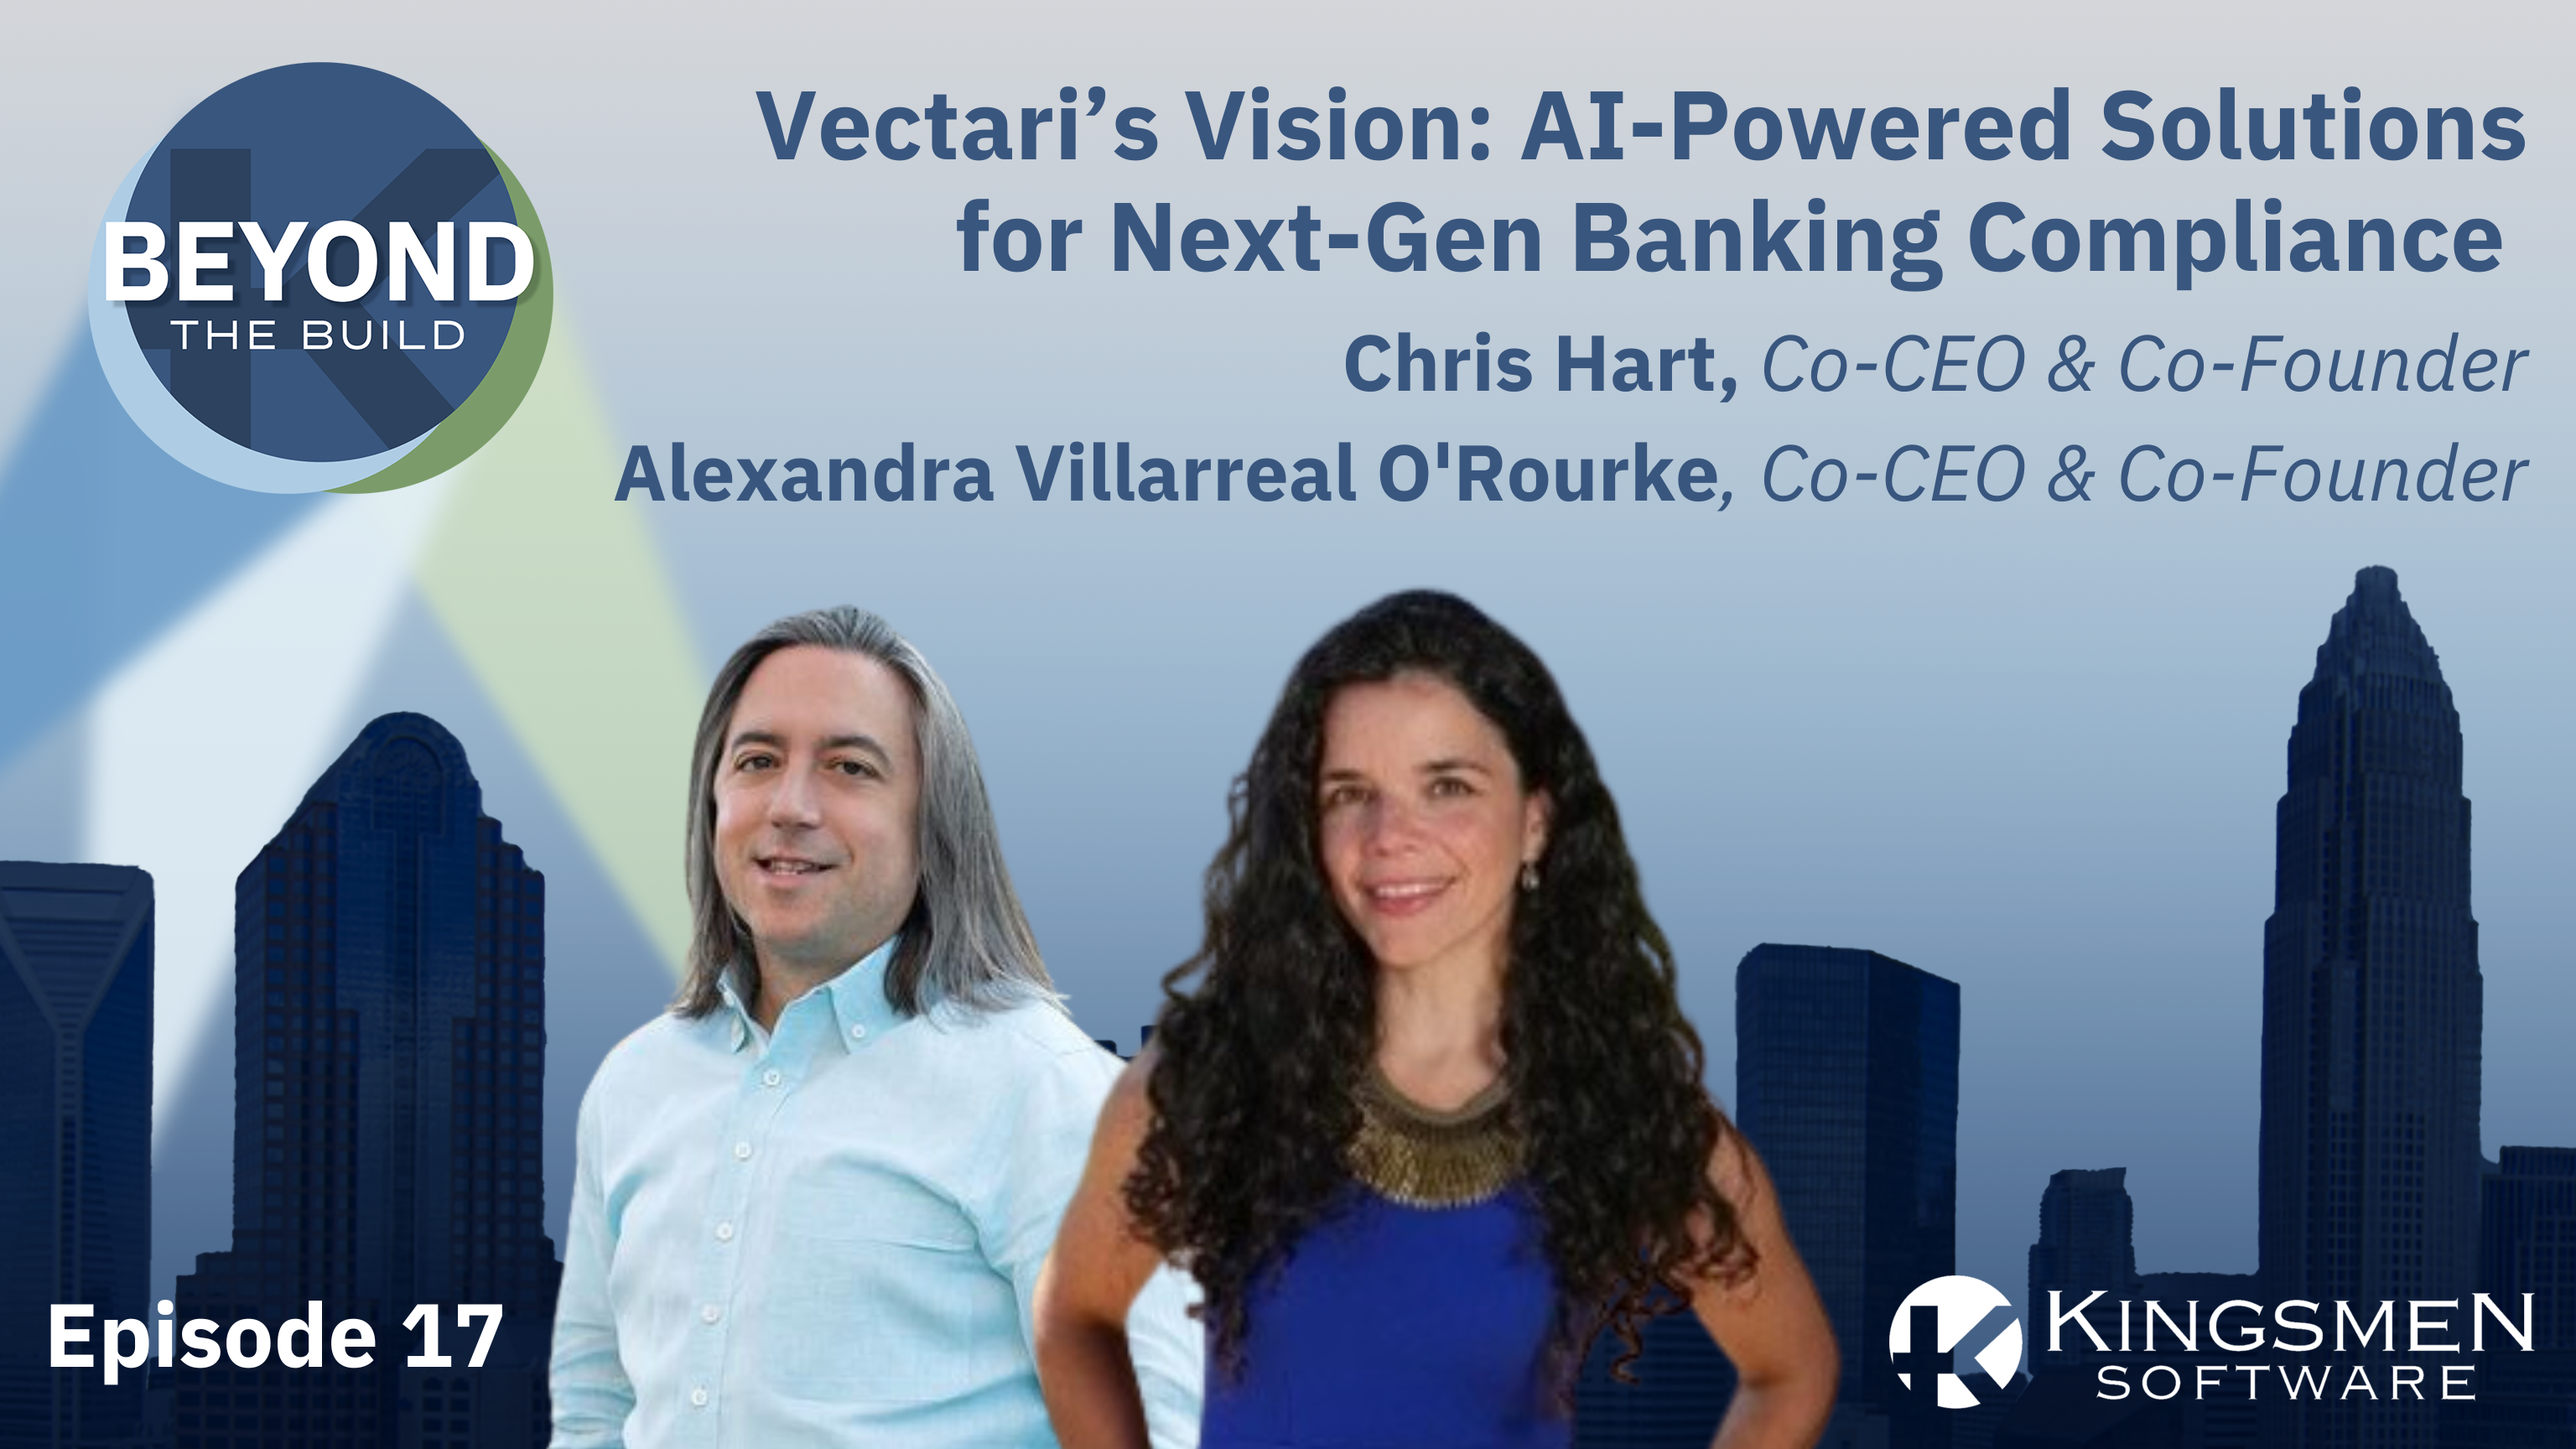 Episode 17: Vectari’s Vision: AI-Powered Solutions for Next-Gen Banking Compliance